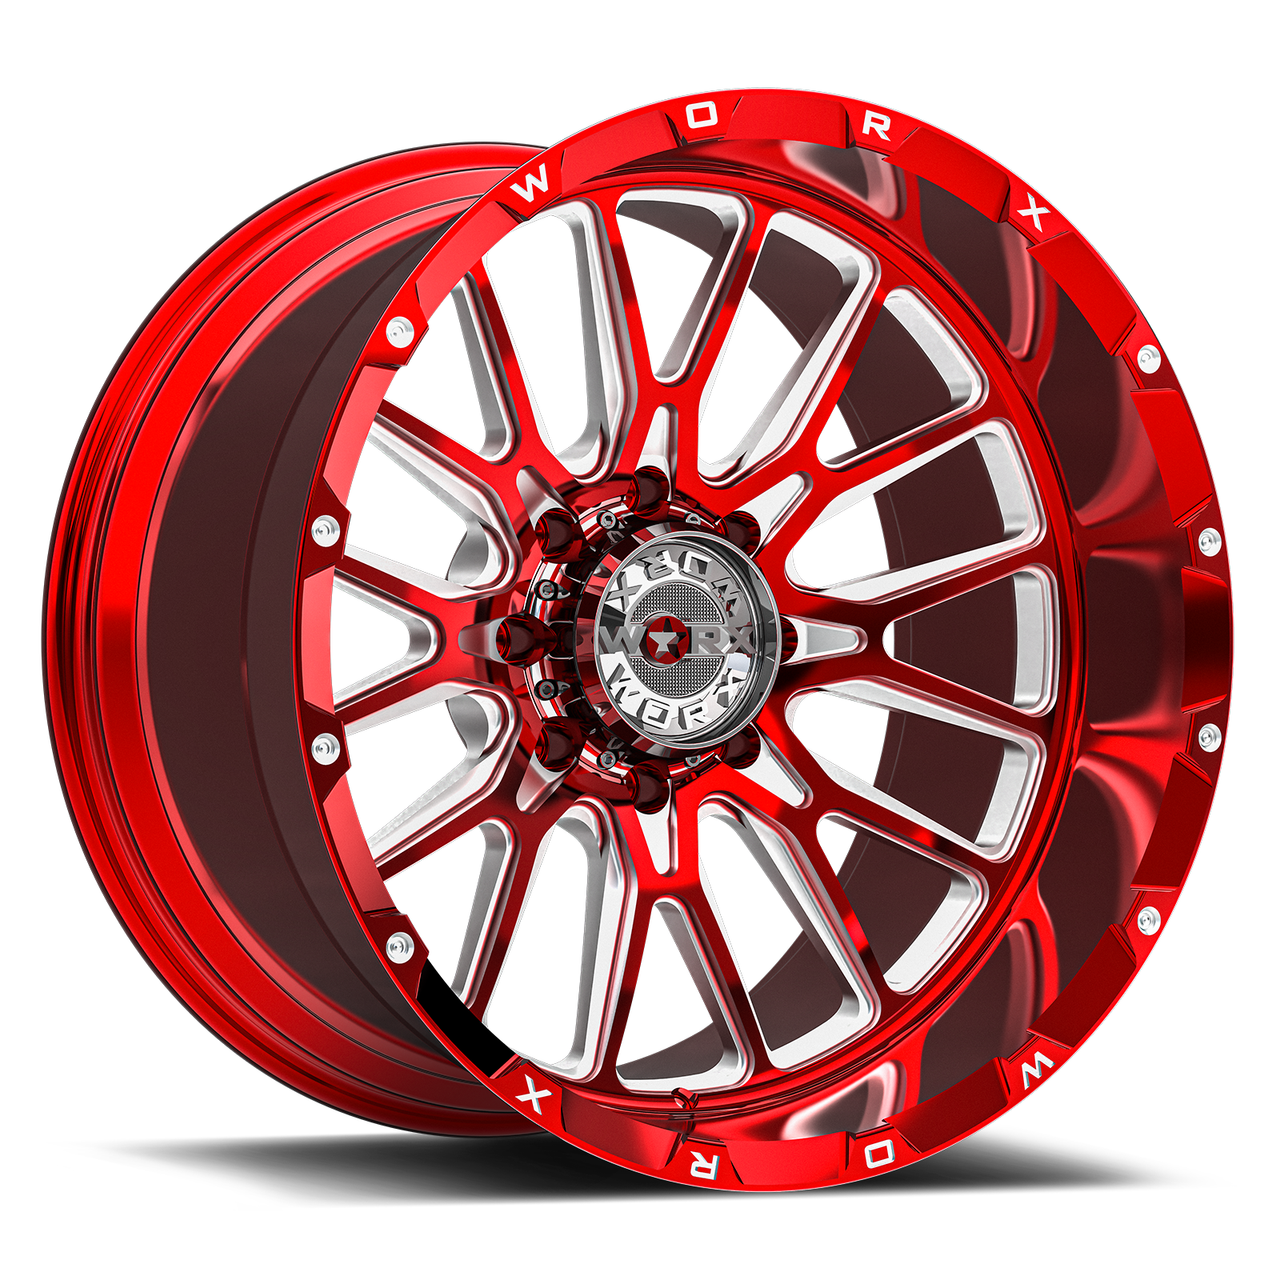 22" Worx 818RM Red Milled Wheel 22x12 8x180 -44mm Lifted For Chevy GMC Truck Rim